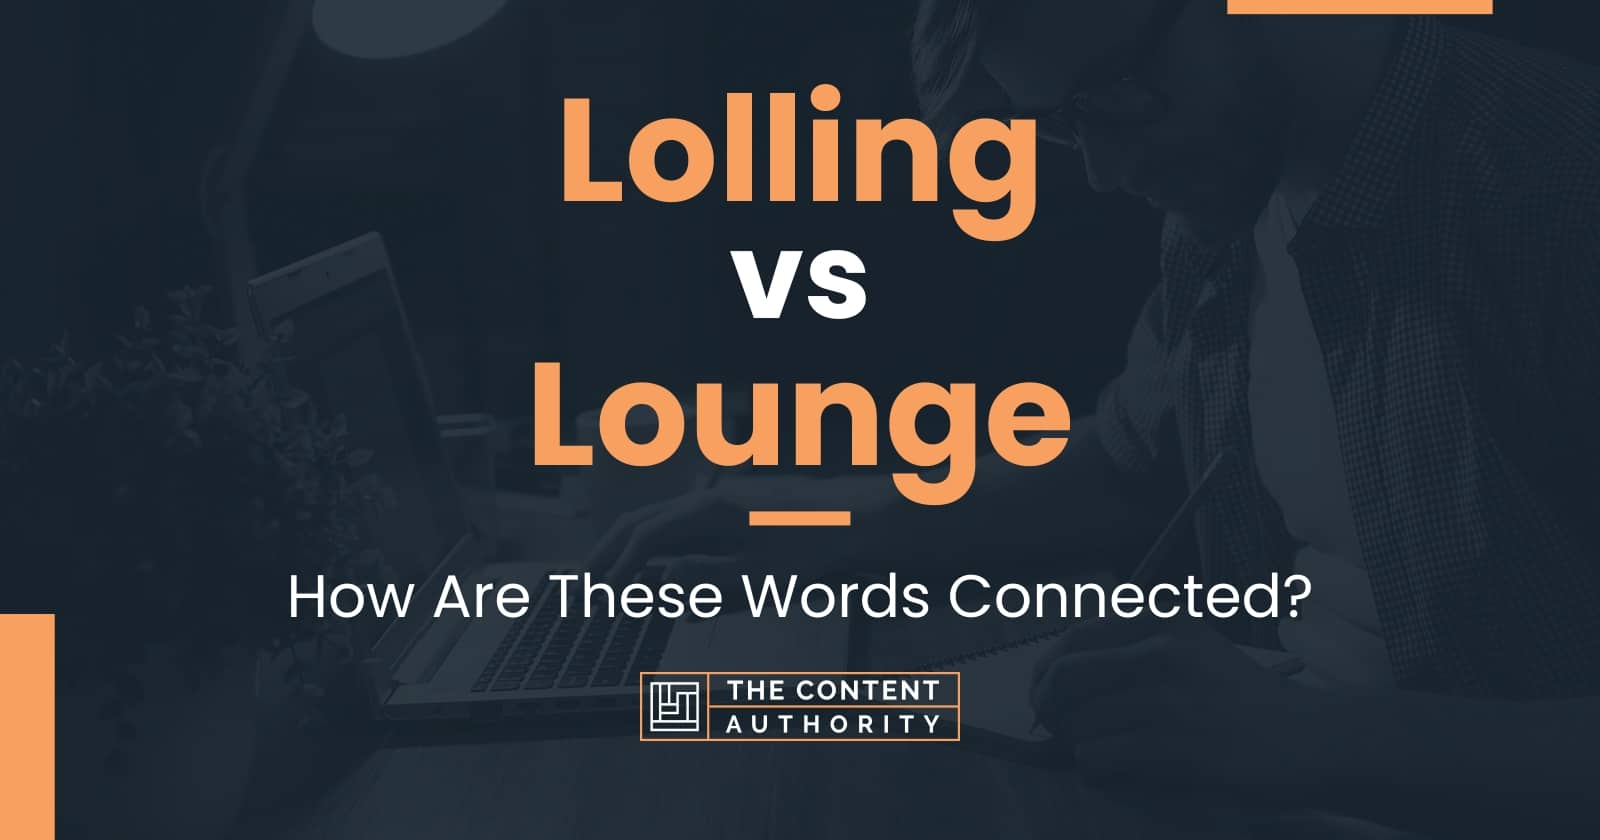 Lolling vs Lounge: How Are These Words Connected?